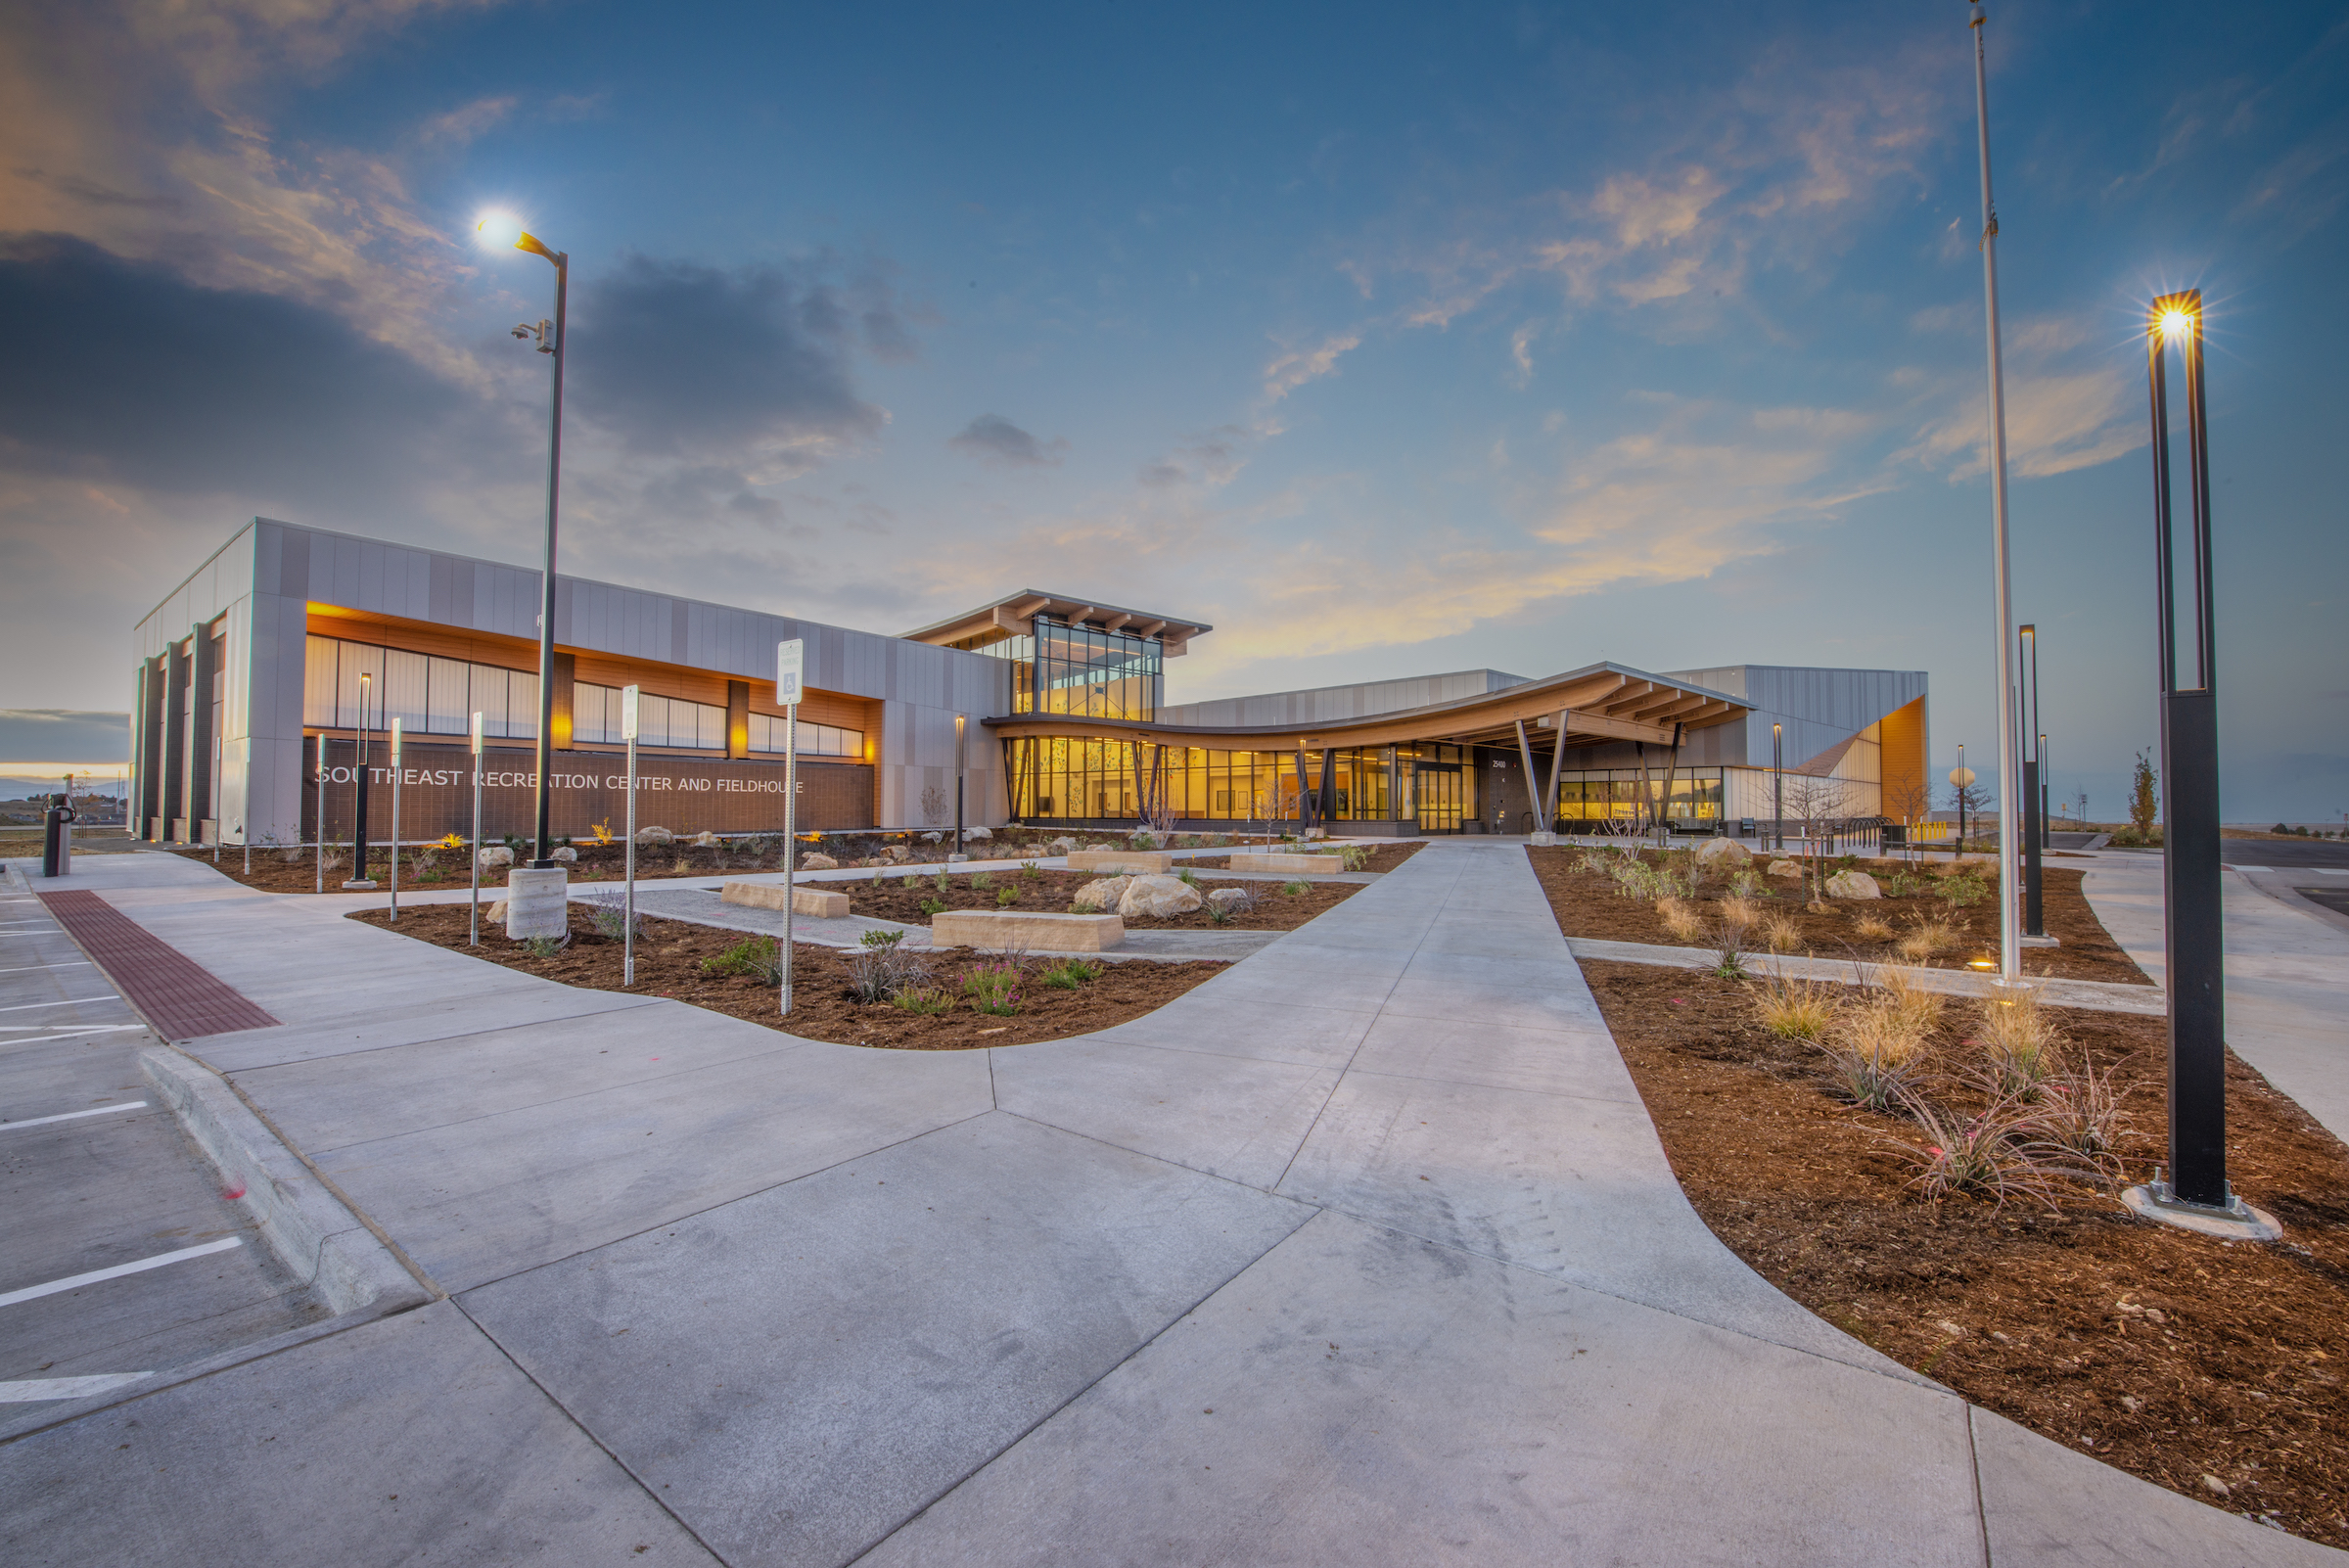 Southeast Aurora Recreation Center and Fieldhouse by Populous Photo by Conor Culver